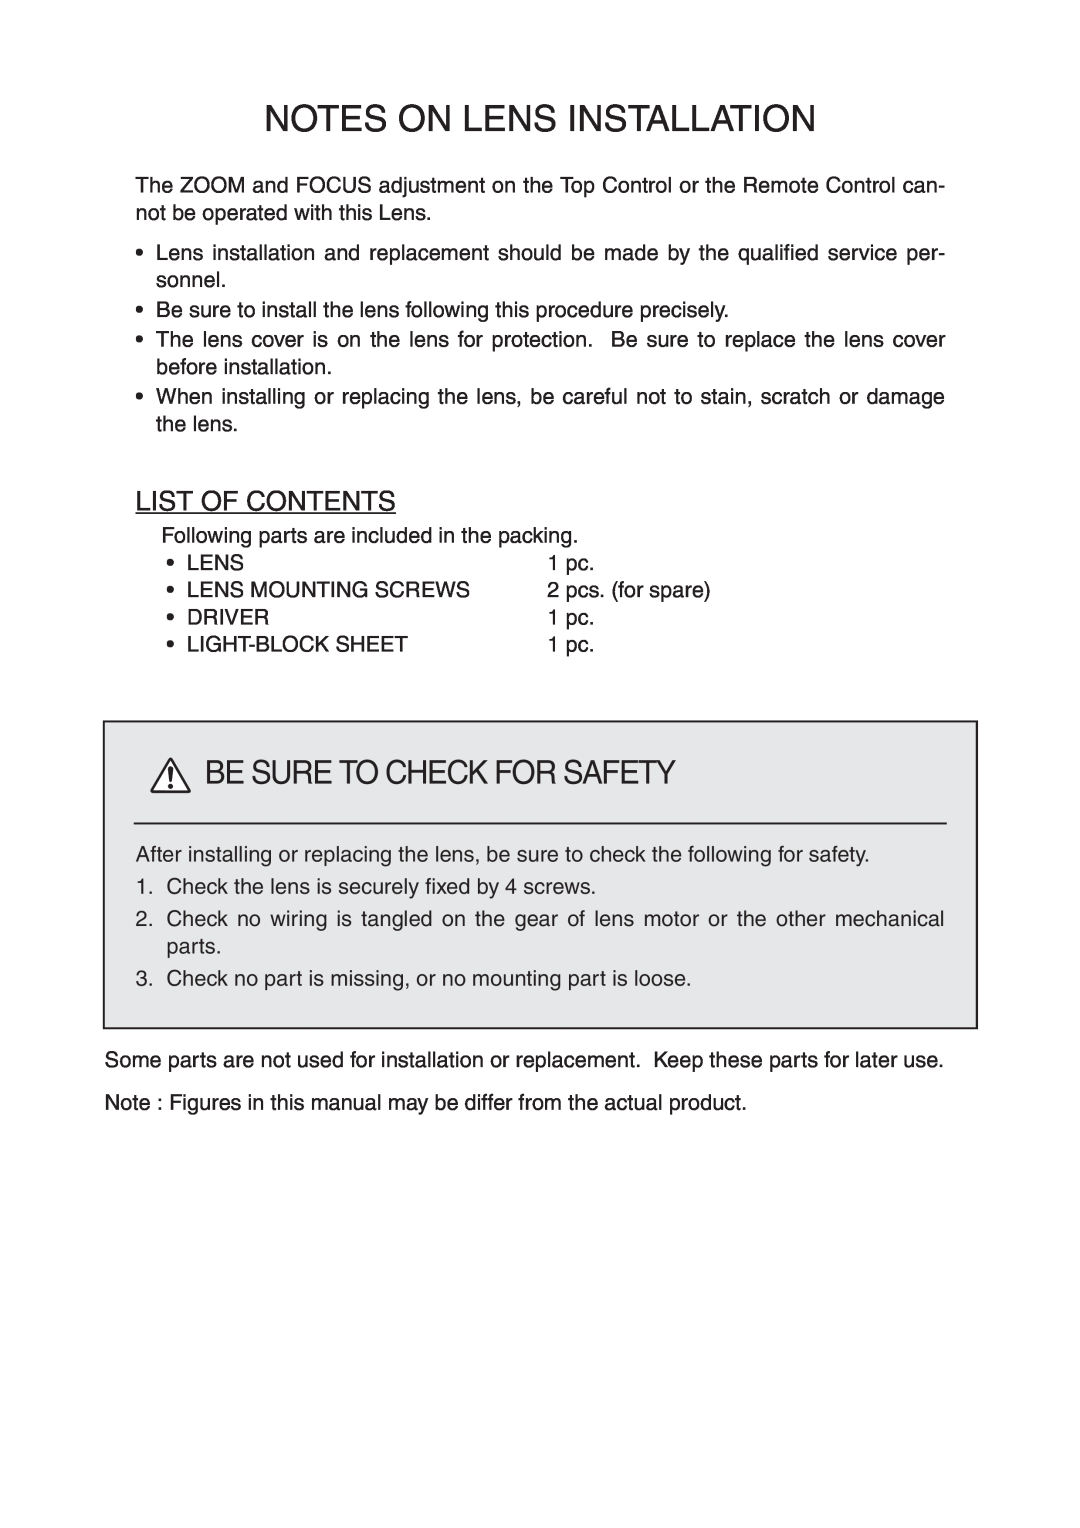 Sanyo LNS-T01Z, LNS-W01Z installation manual Notes On Lens Installation, Be Sure To Check For Safety, List Of Contents 